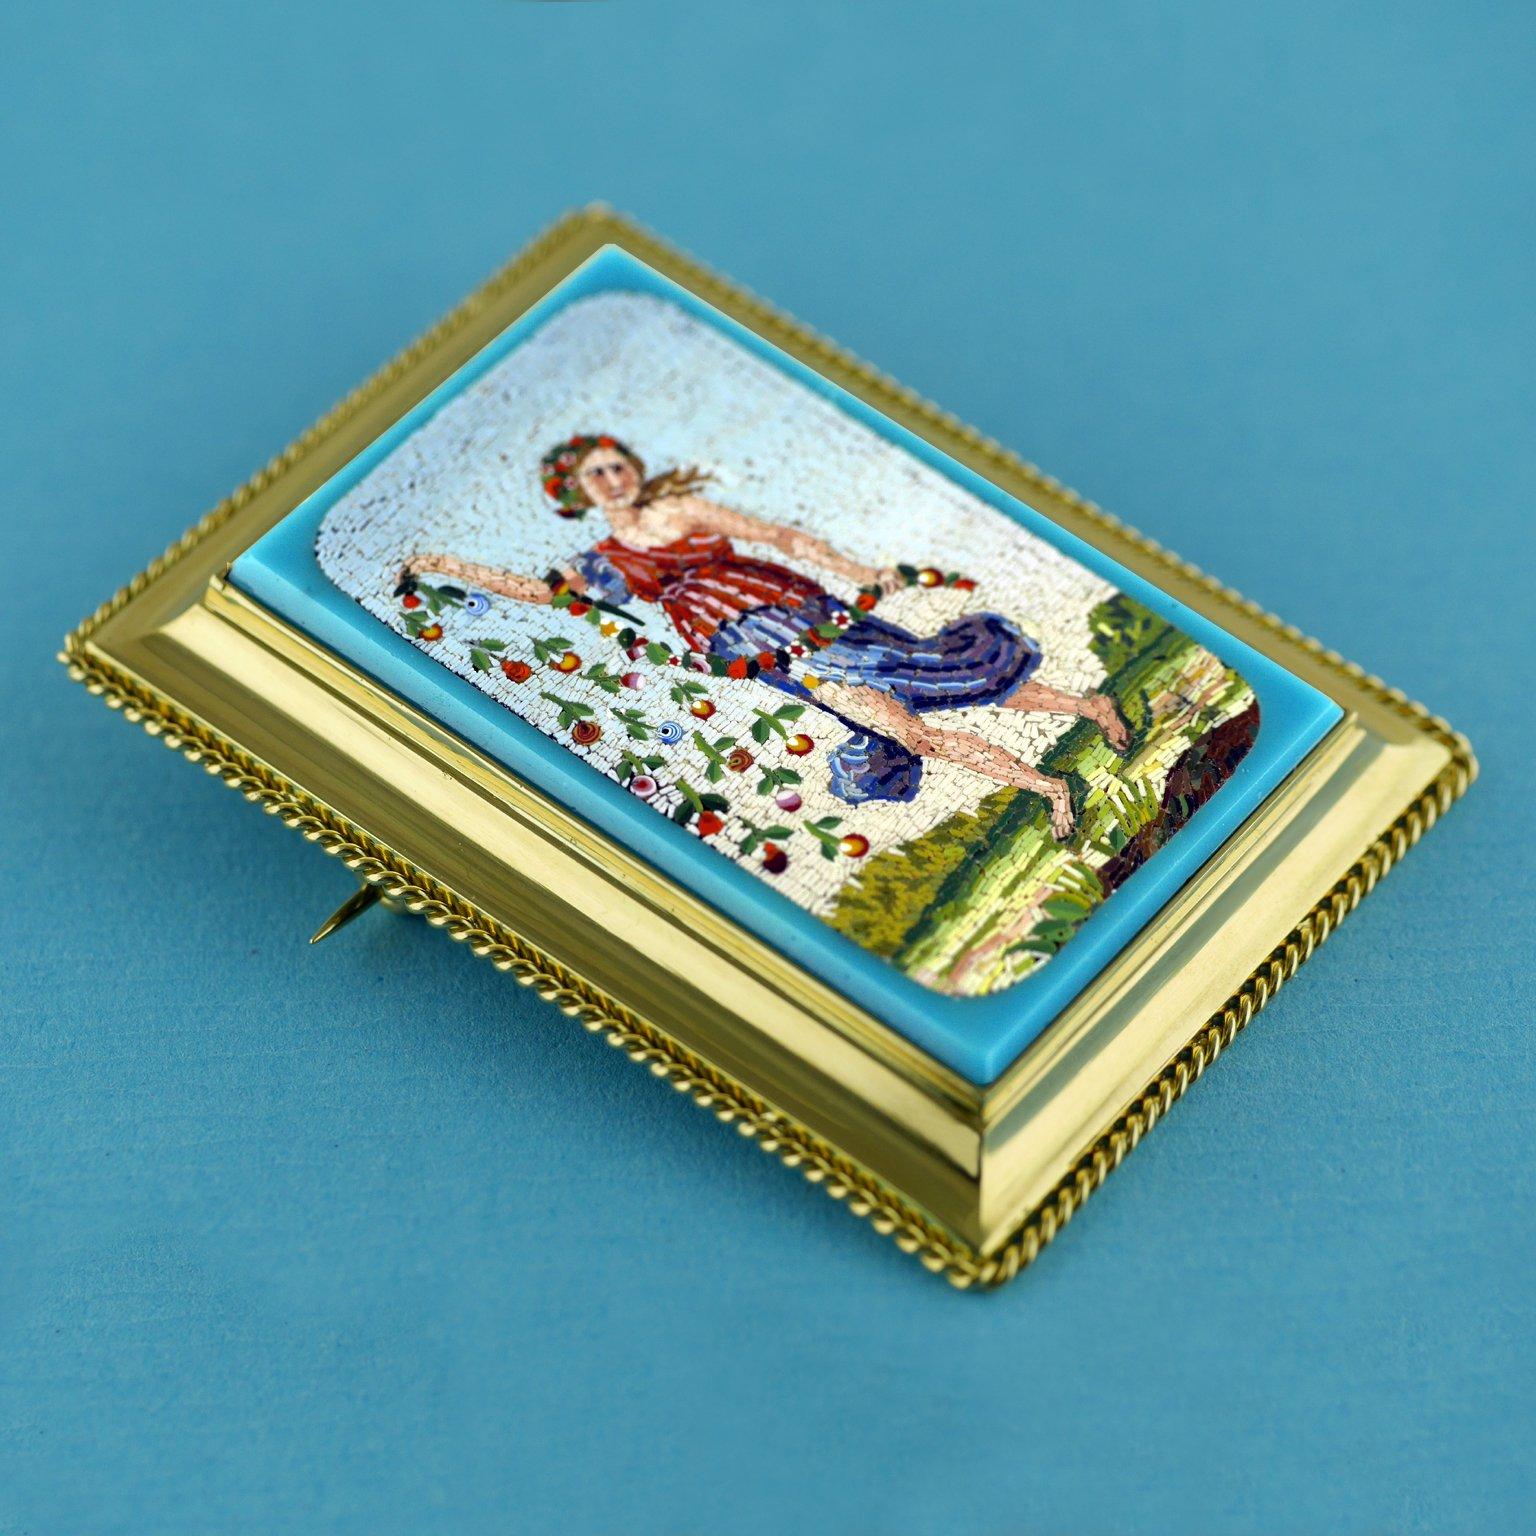 Early Victorian Victorian Micromosaic Brooch Depicting Flora Goddess of Spring, circa 1850